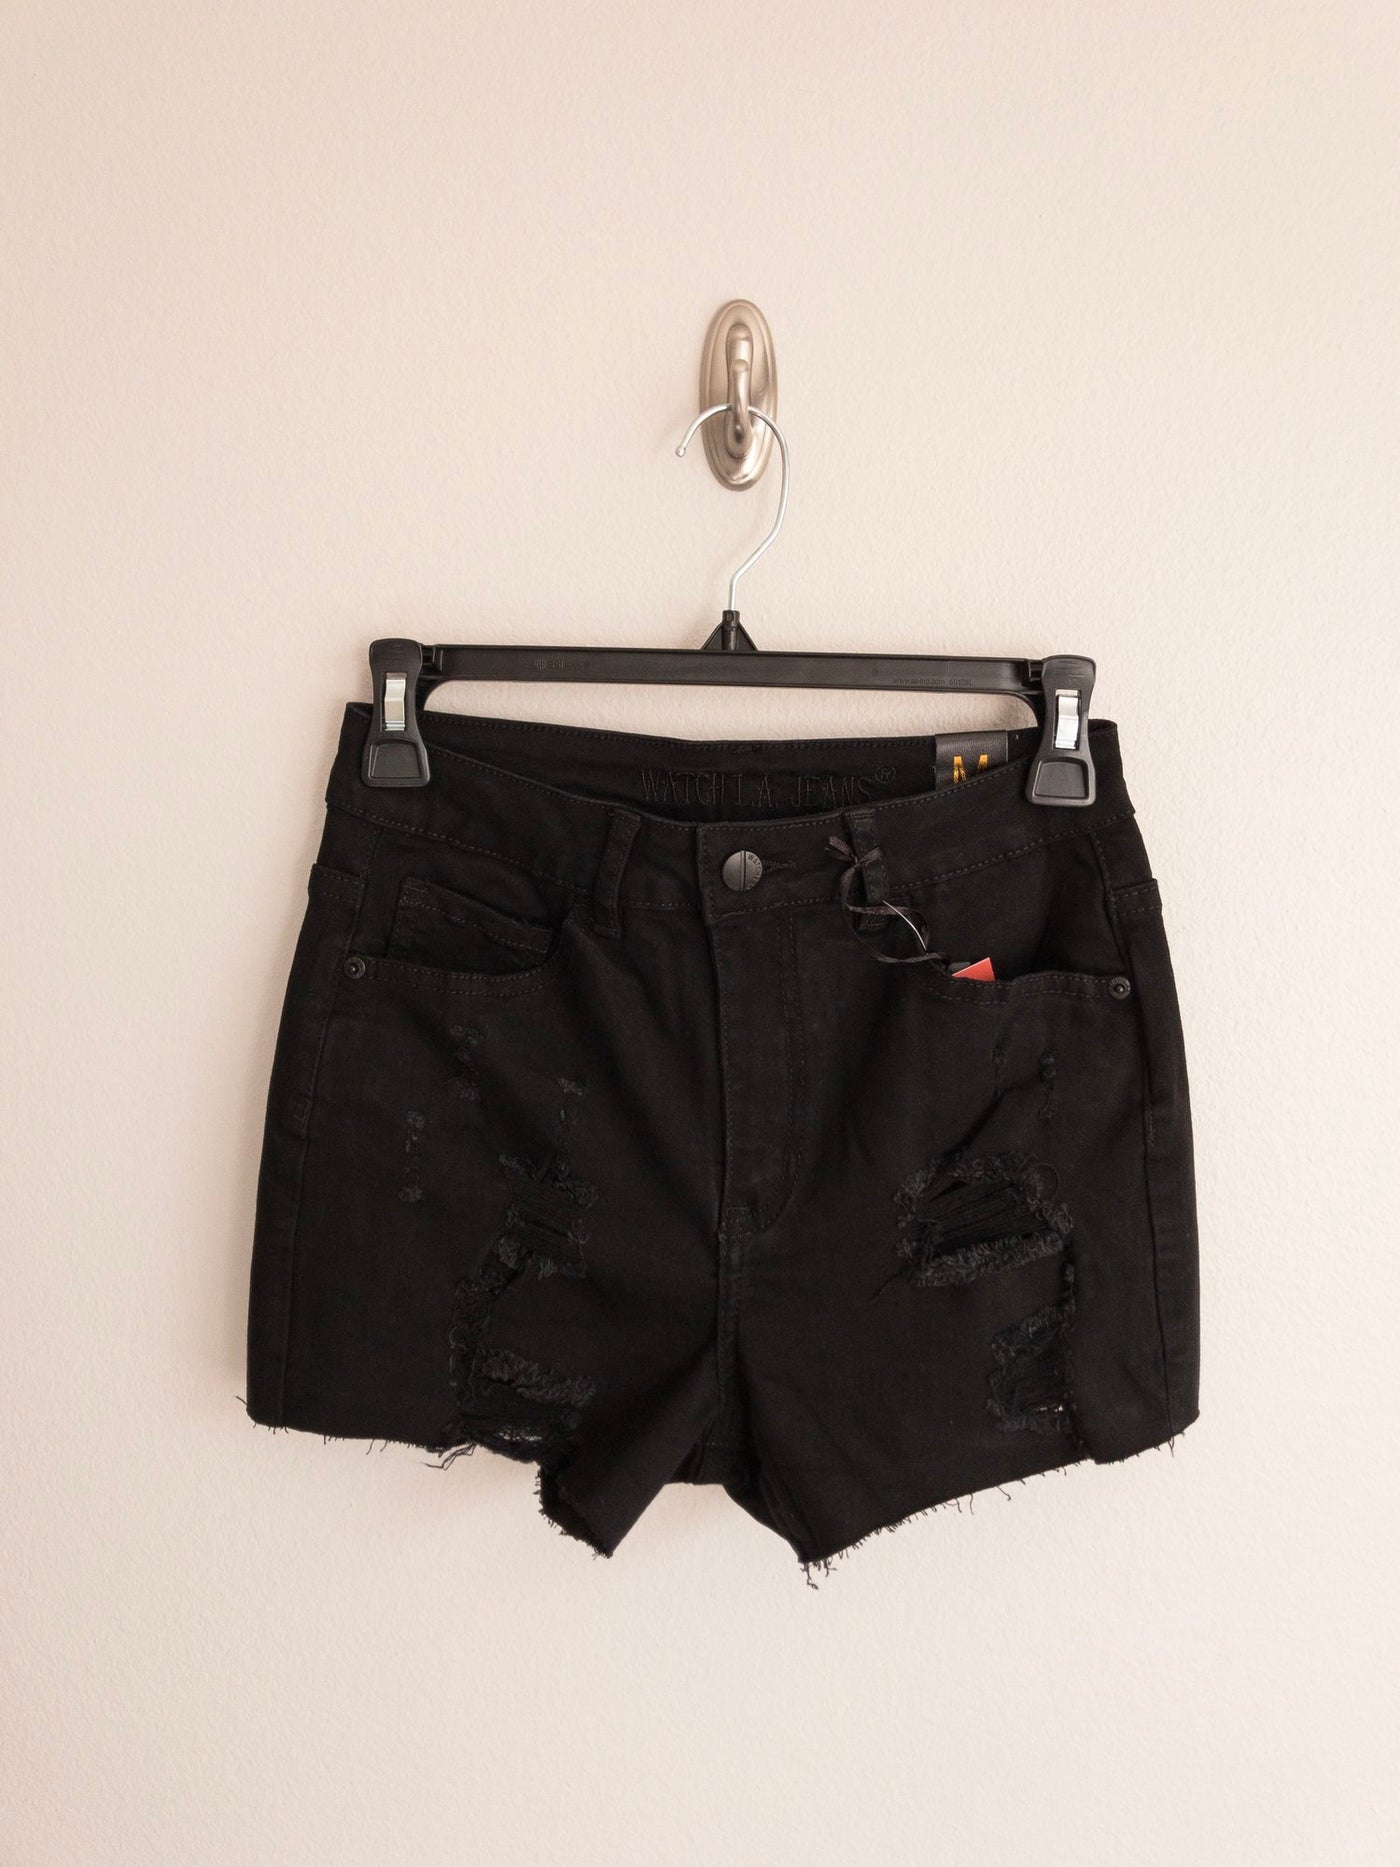 Staci Denim Shorts - Corinne an Affordable Women's Clothing Boutique in the US USA